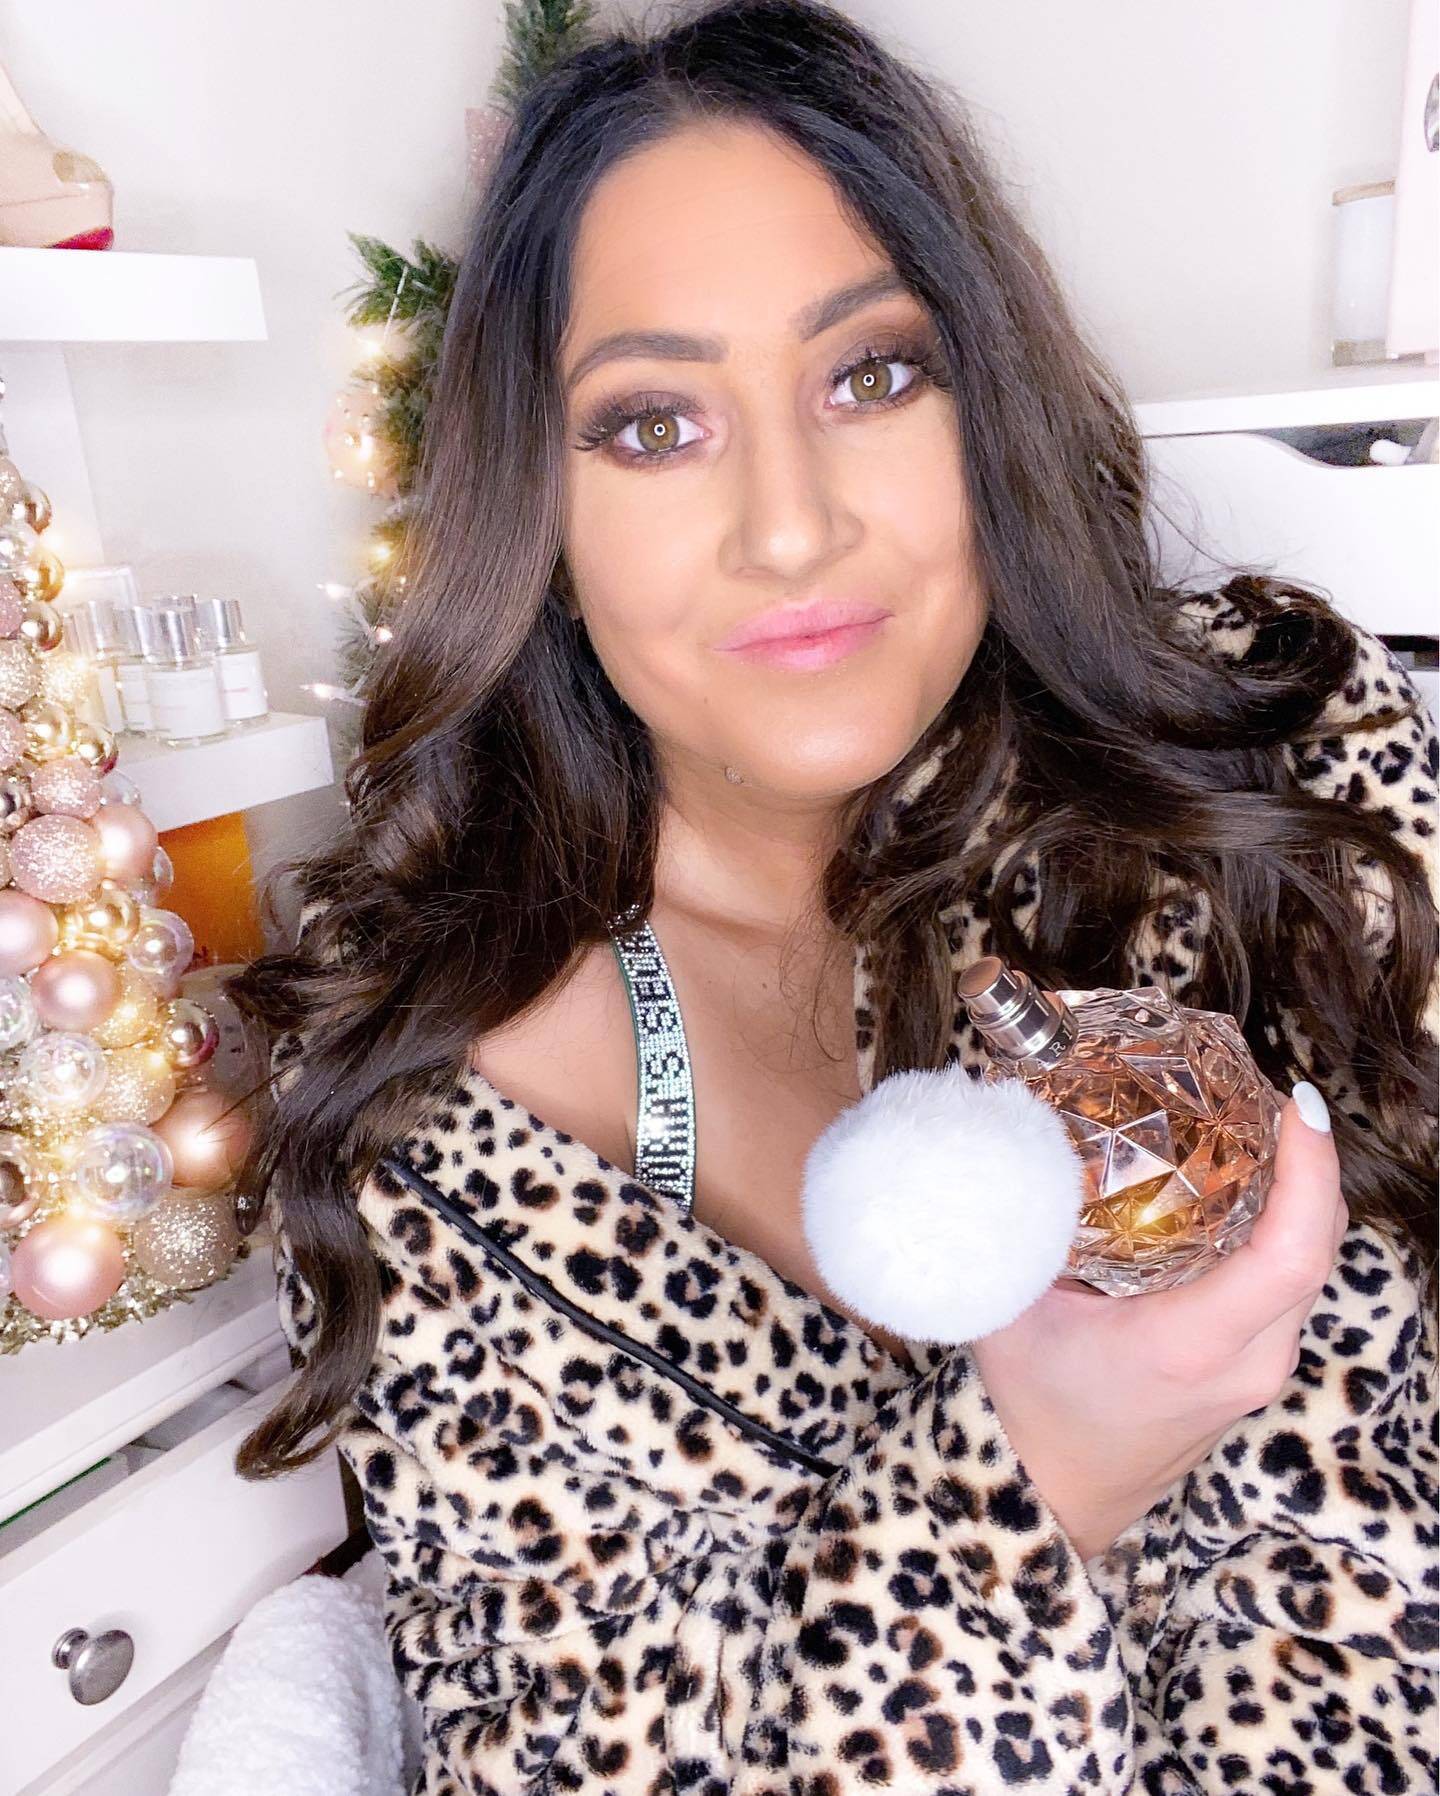 My new signature scent for going out 🥰 it smells amazing. If you know you know ✨
.
Shop everything on my @shop.ltk (selahchristeen) including the softest robe ever 
.
.
#robe #gettingready #victoriassecret #cheetahprint #michiganblogger #detroitblogger #ari #perfume #fragrance #ariannagrande #lifestyleblogger #michiganyoutuber #lazydays #glam #cheetahrobe #ariannagrandefragrance